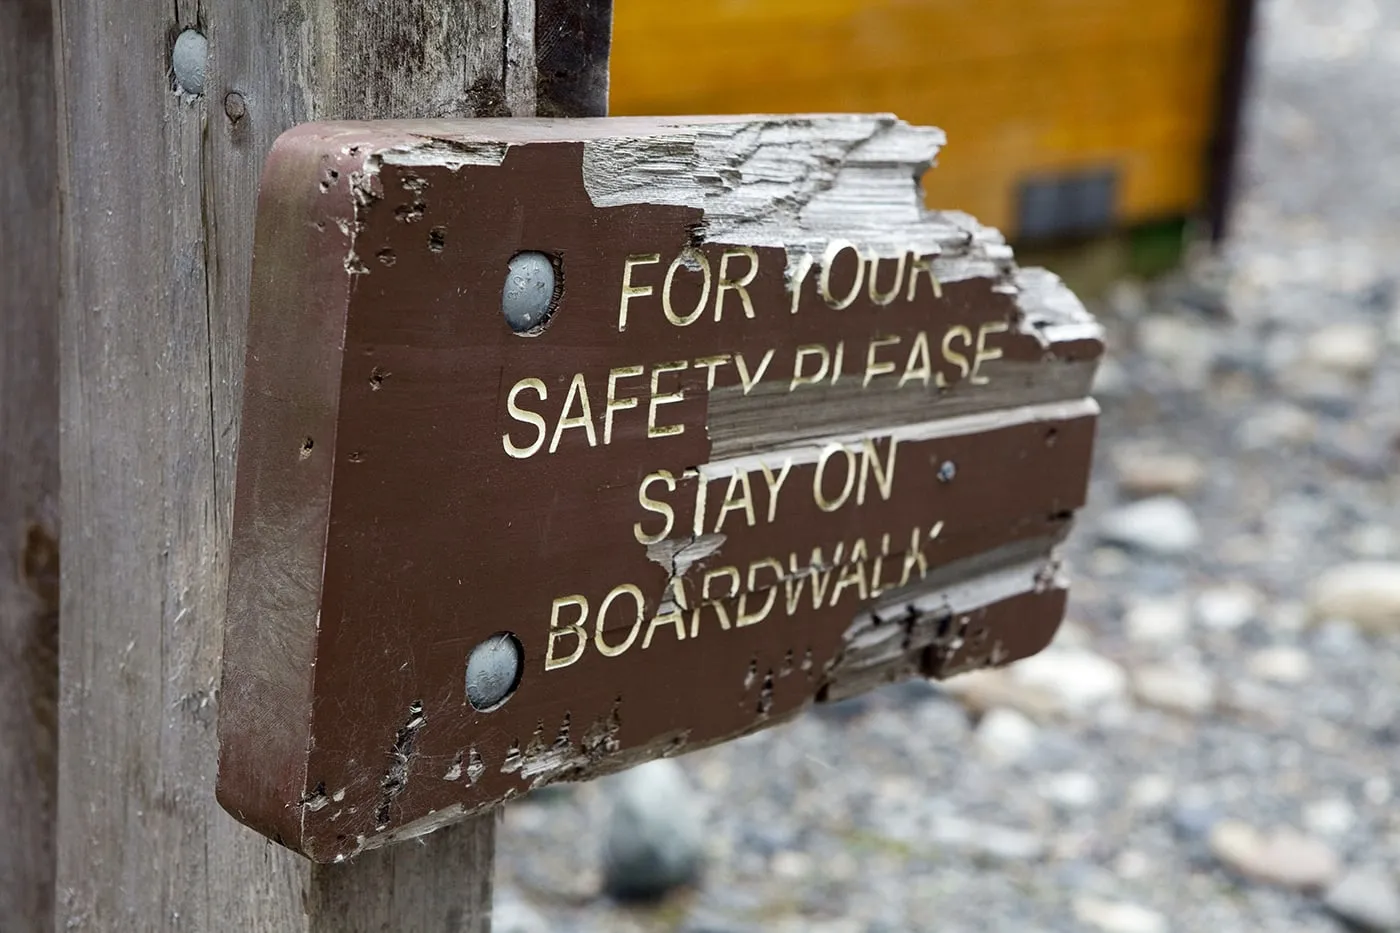 For your safety stay on boardwalk sign at the Fish Creek Wildlife Observation Site at the Tongass National Forest in Hyder, Alaska.